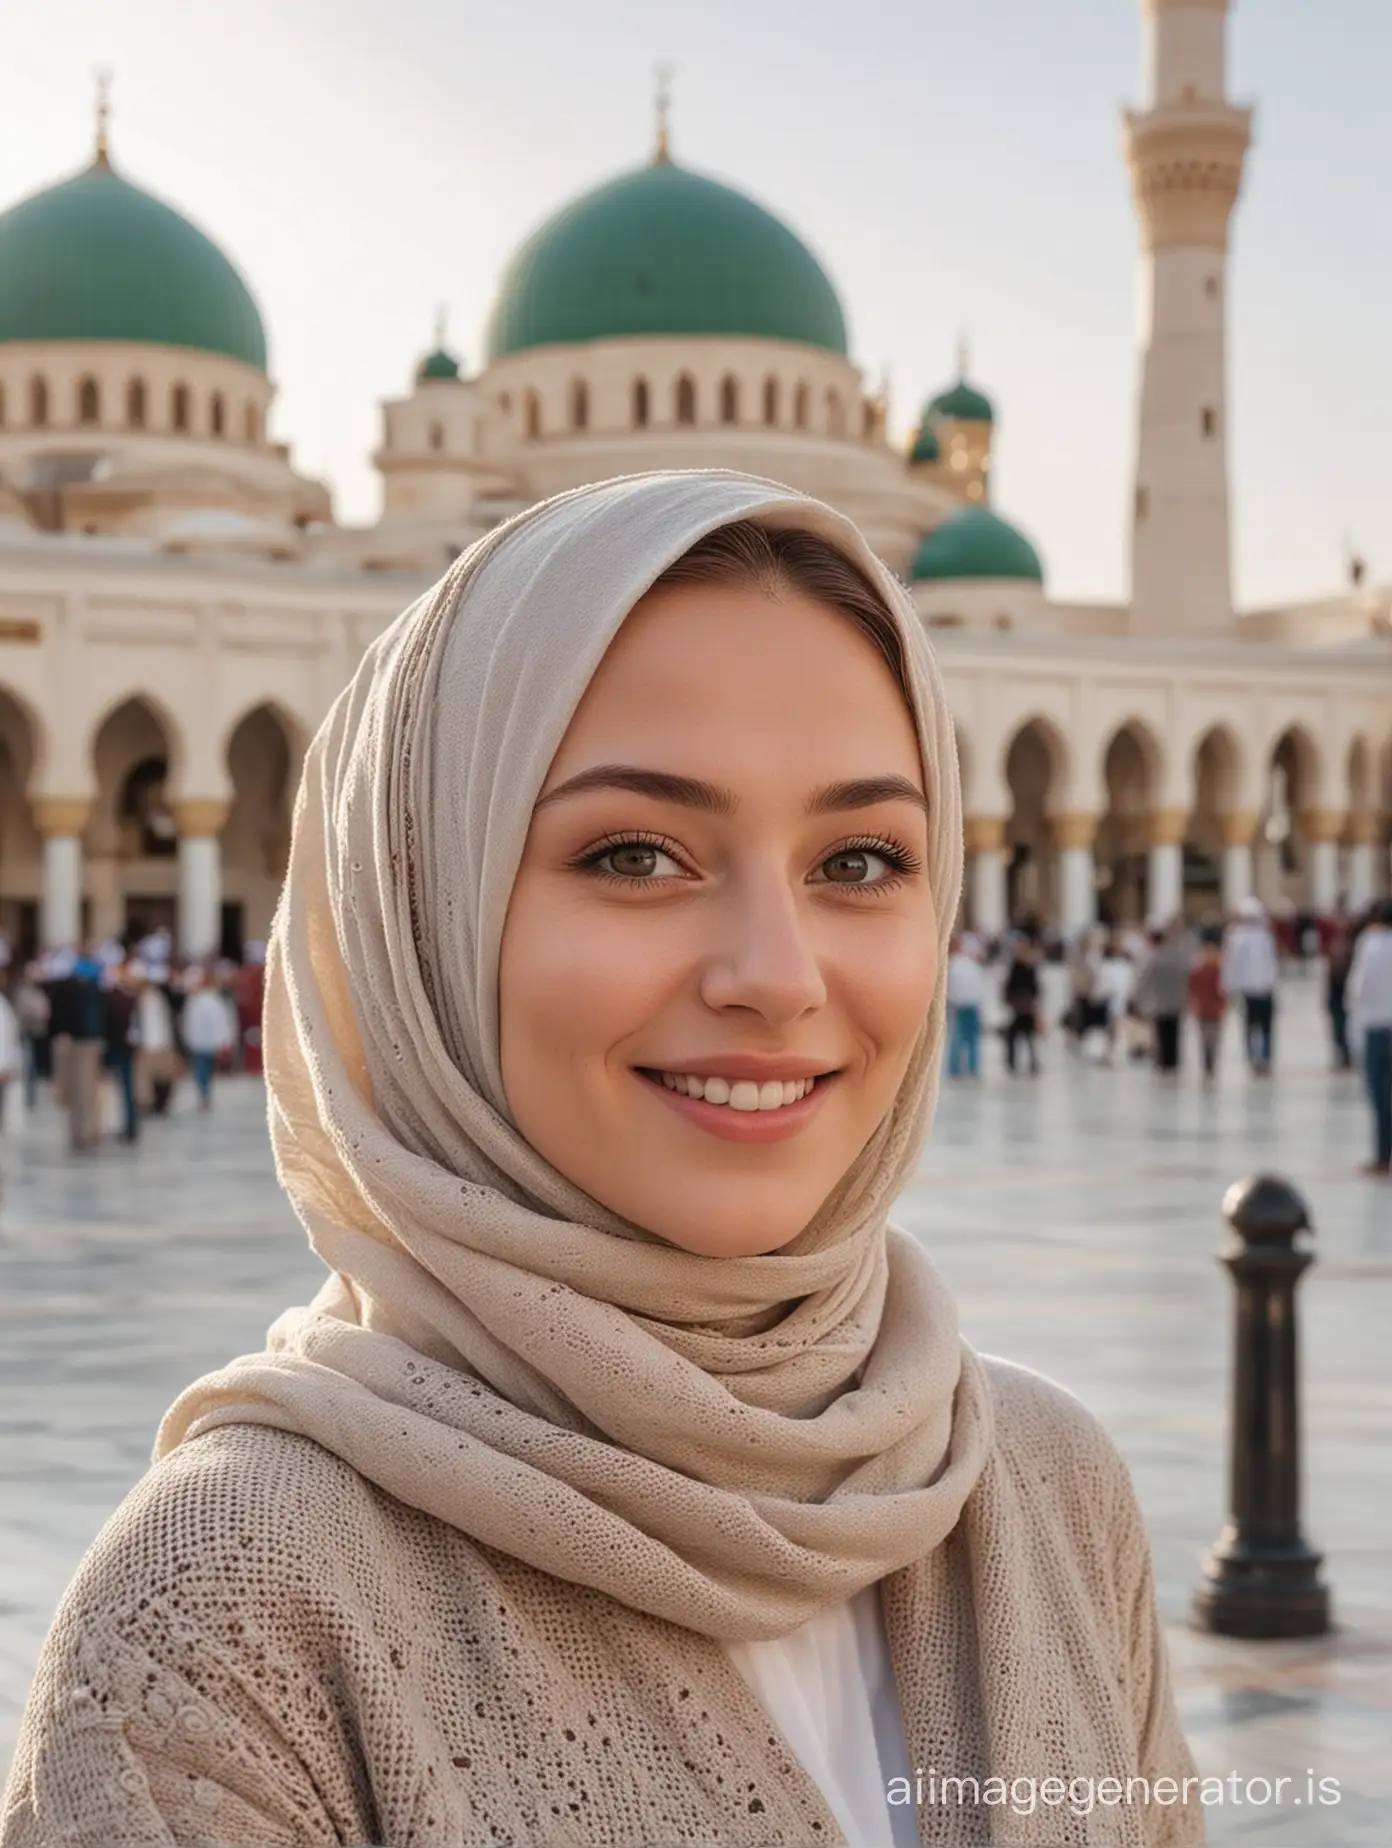 Russian girl in hijab, wearing outer cardigan, eye level, dynamic pose, smile, deep focus,background Mecca mosque